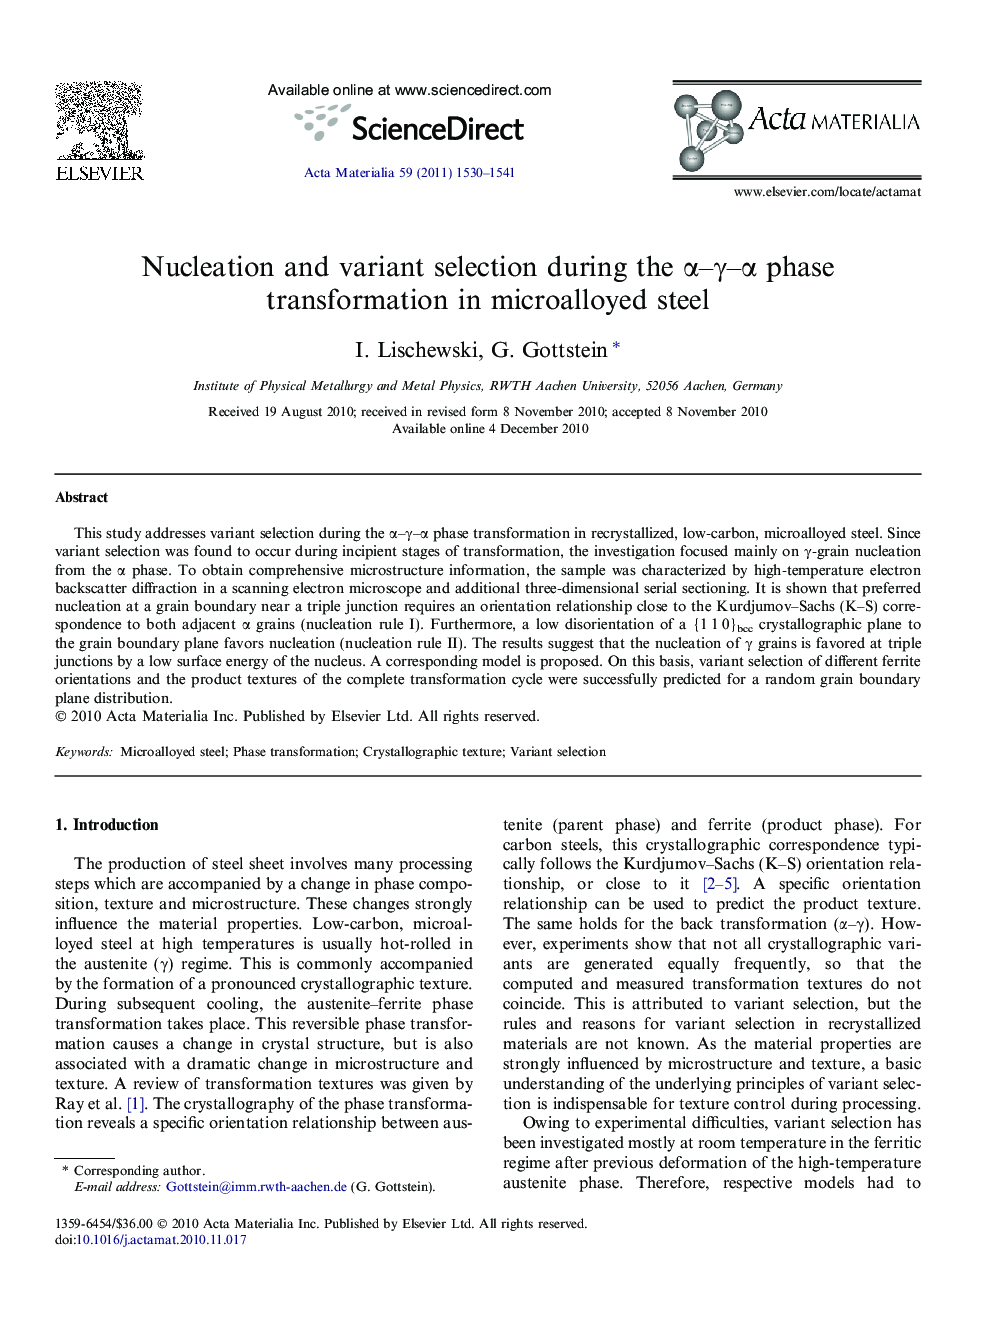 Nucleation and variant selection during the Î±-Î³-Î± phase transformation in microalloyed steel